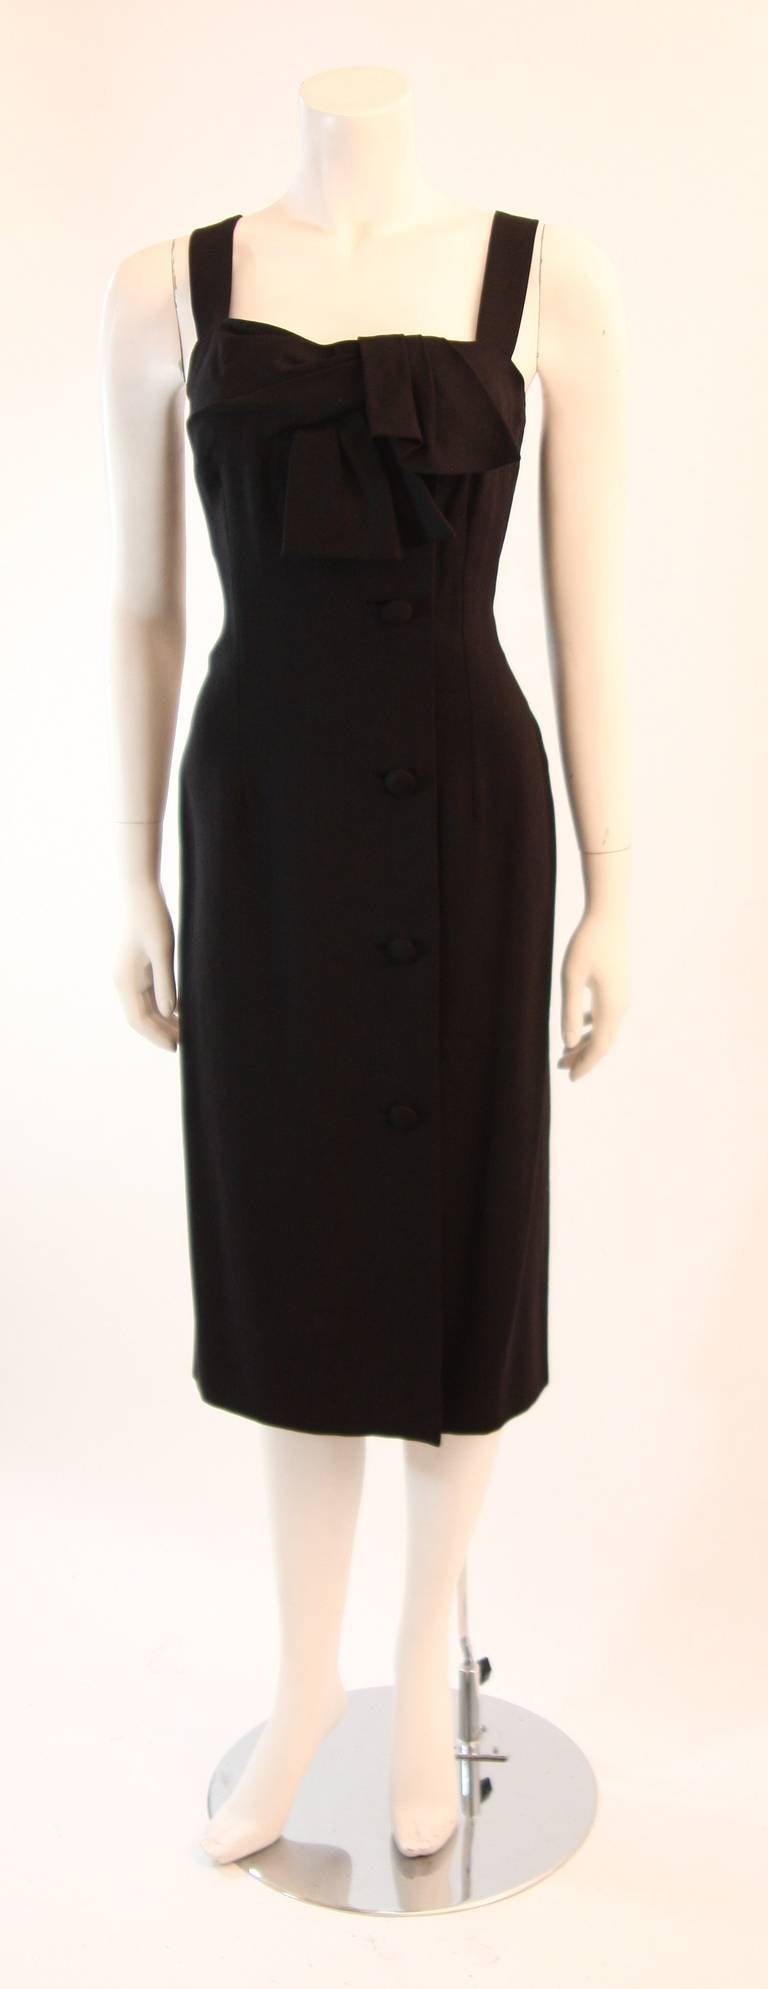  Pierre Balmain 'Couture' Black Linen Dress with Bow Accent In Excellent Condition For Sale In Los Angeles, CA